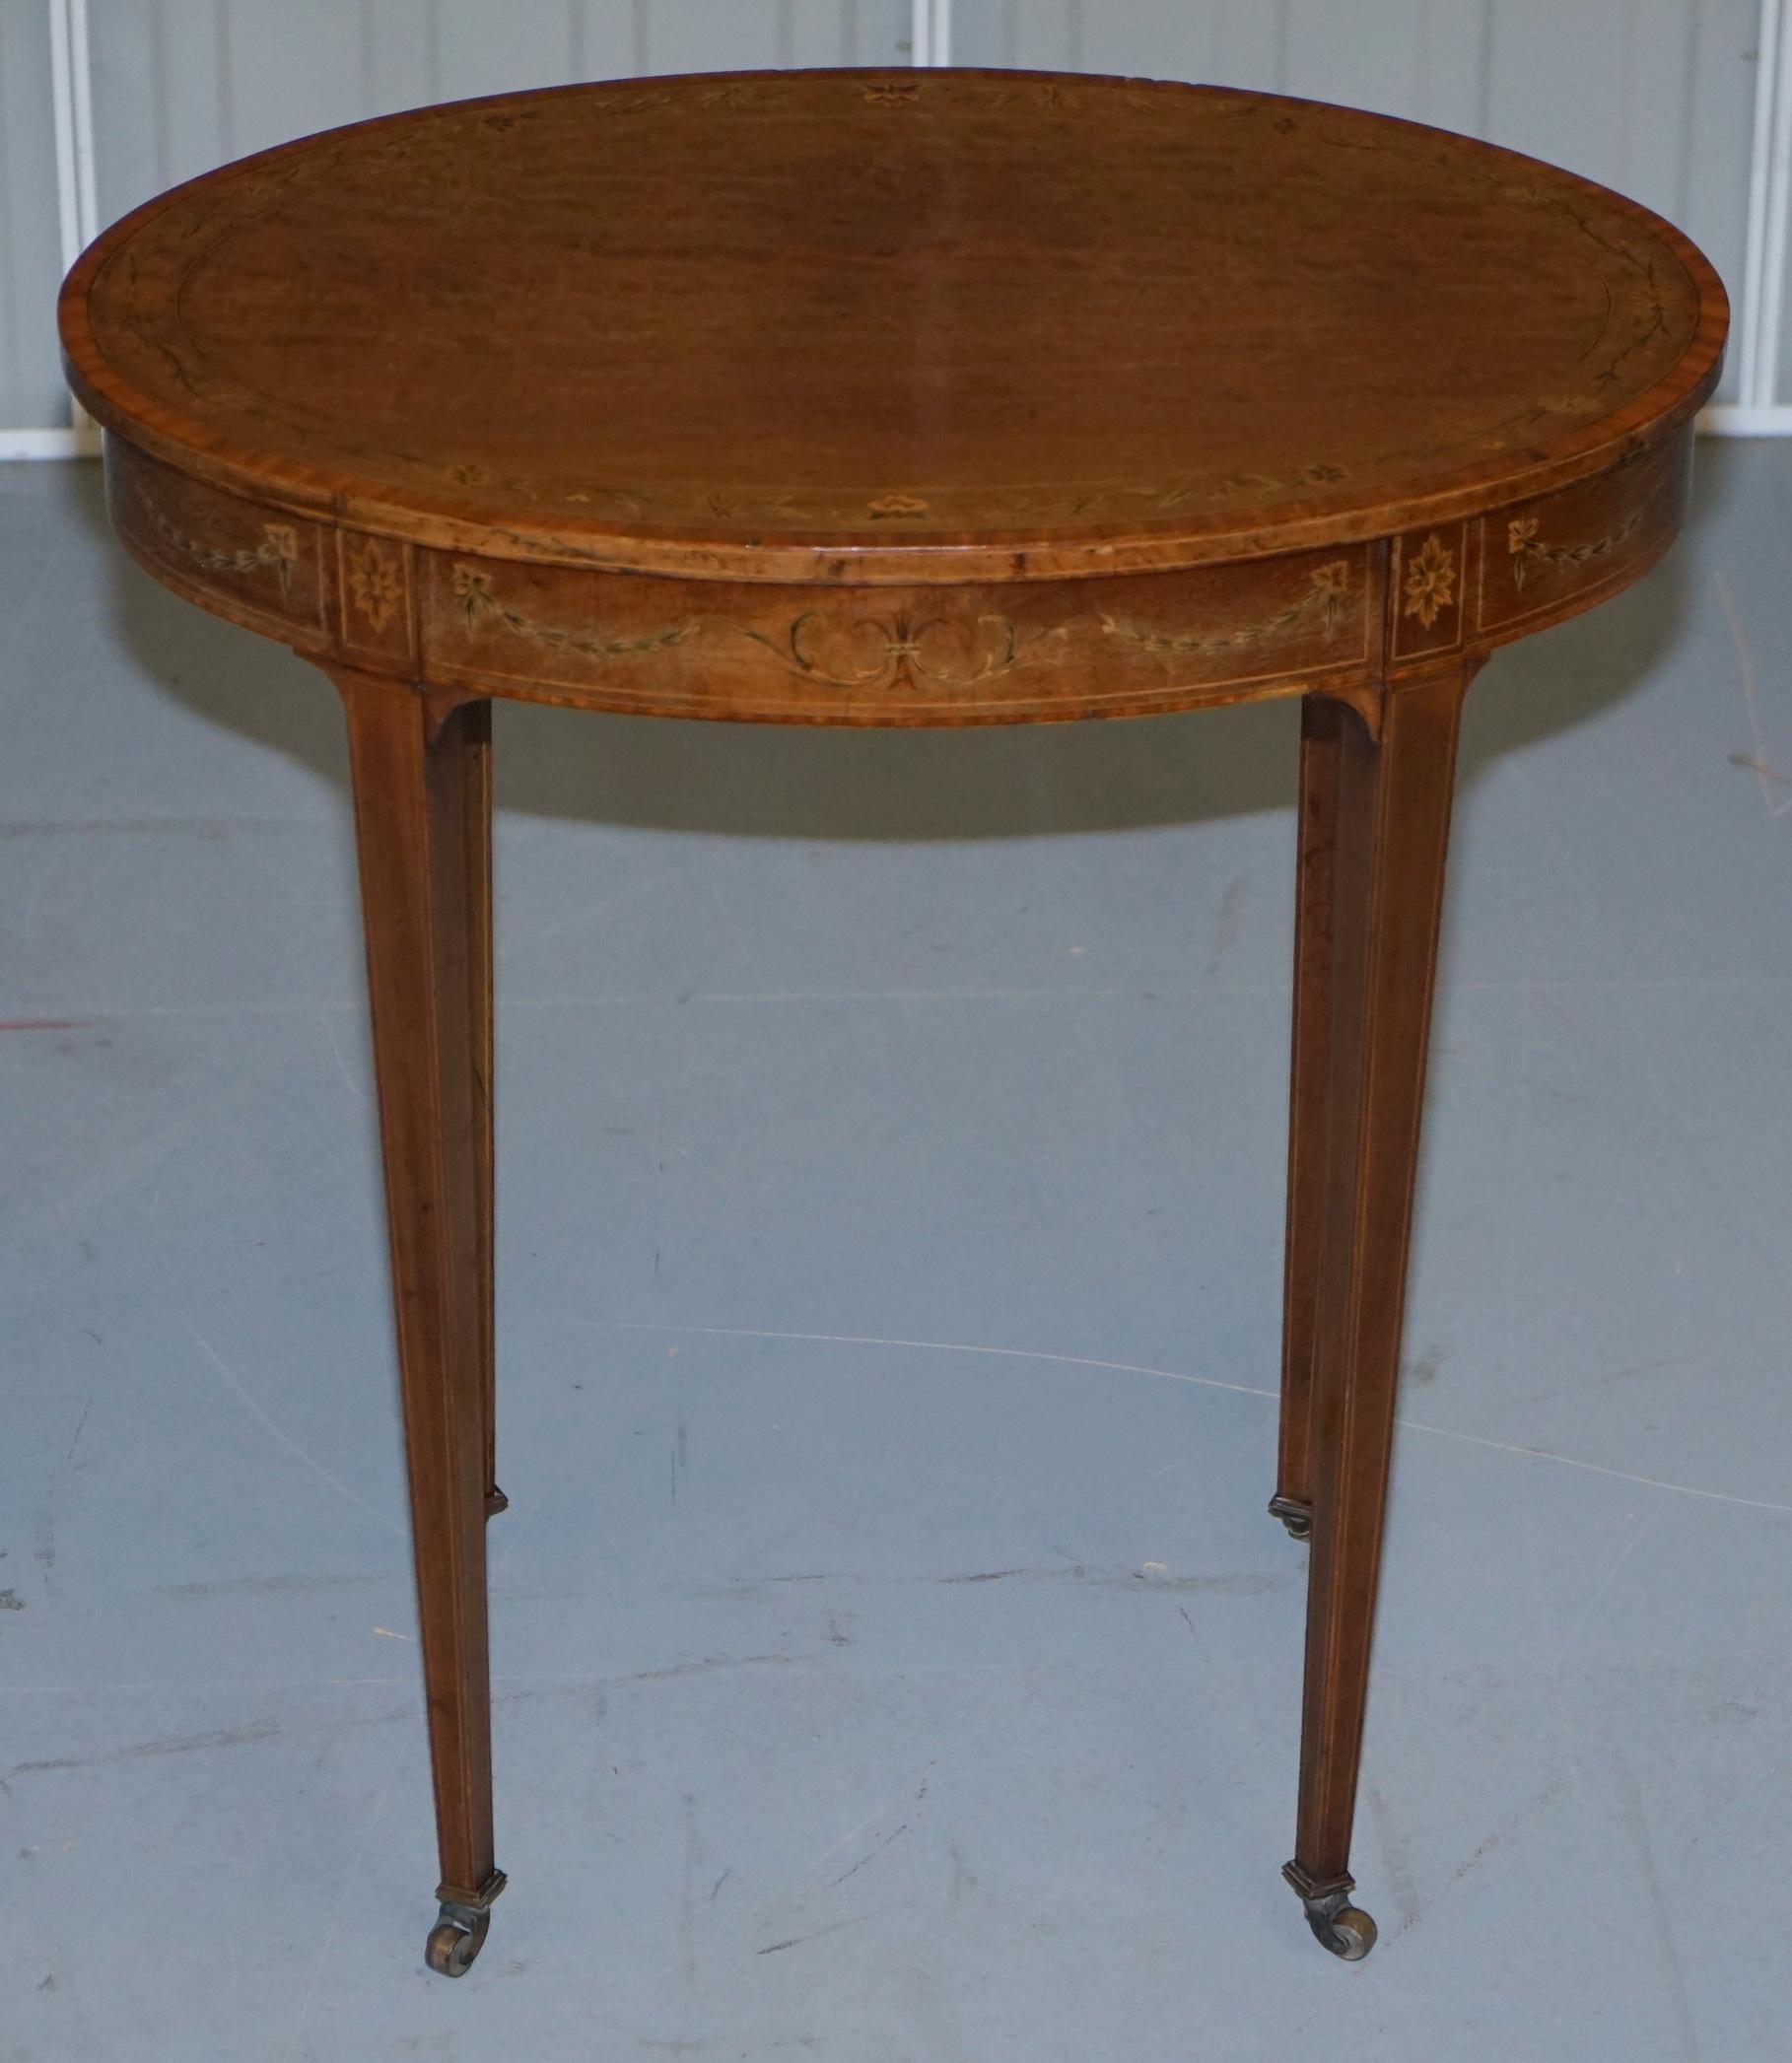 We are delighted to offer for sale this absolutely stunning Victorian Walnut Sheraton floral inlaid oval occasional table

Historically this would have been used as a silver or tea table however with level and quality of inlay it would have been